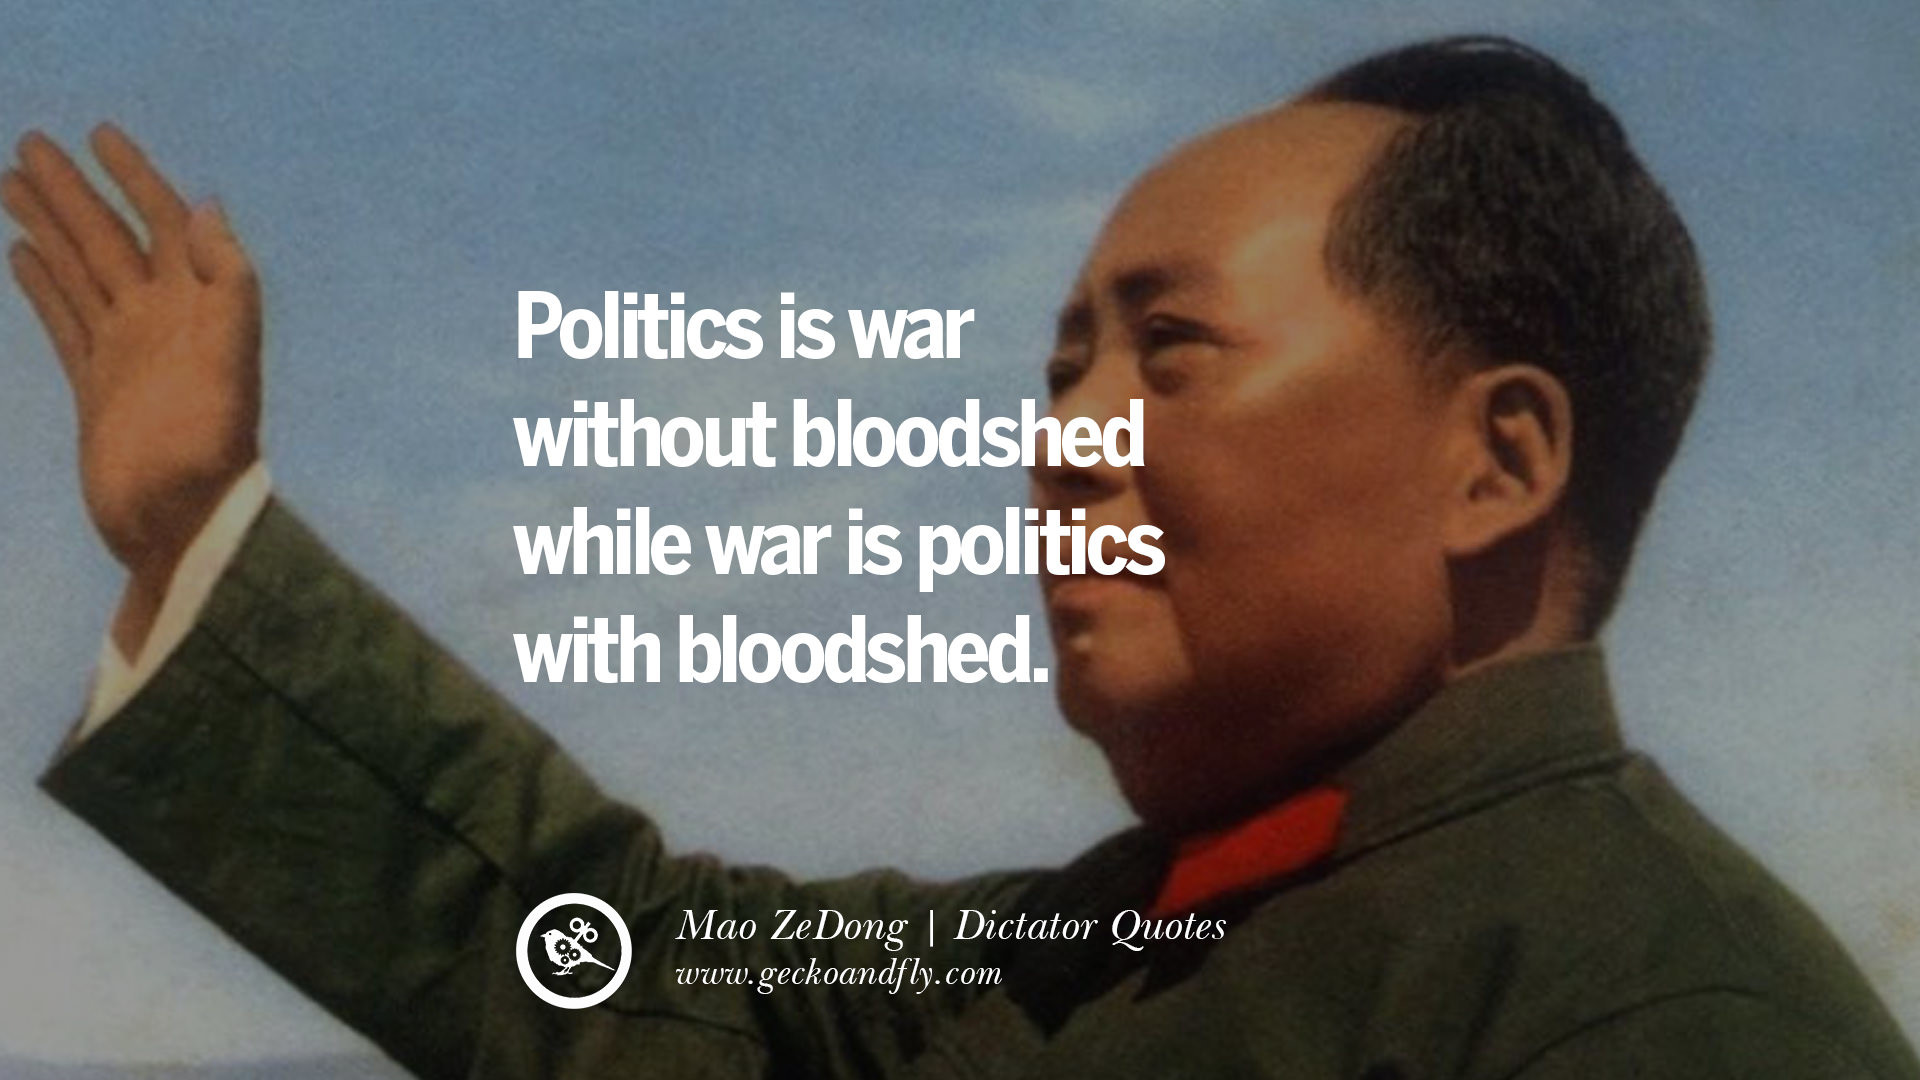 1920x1080 Politics is war without bloodshed while war is politics with bloodshed. - Mao  ZeDong Famous